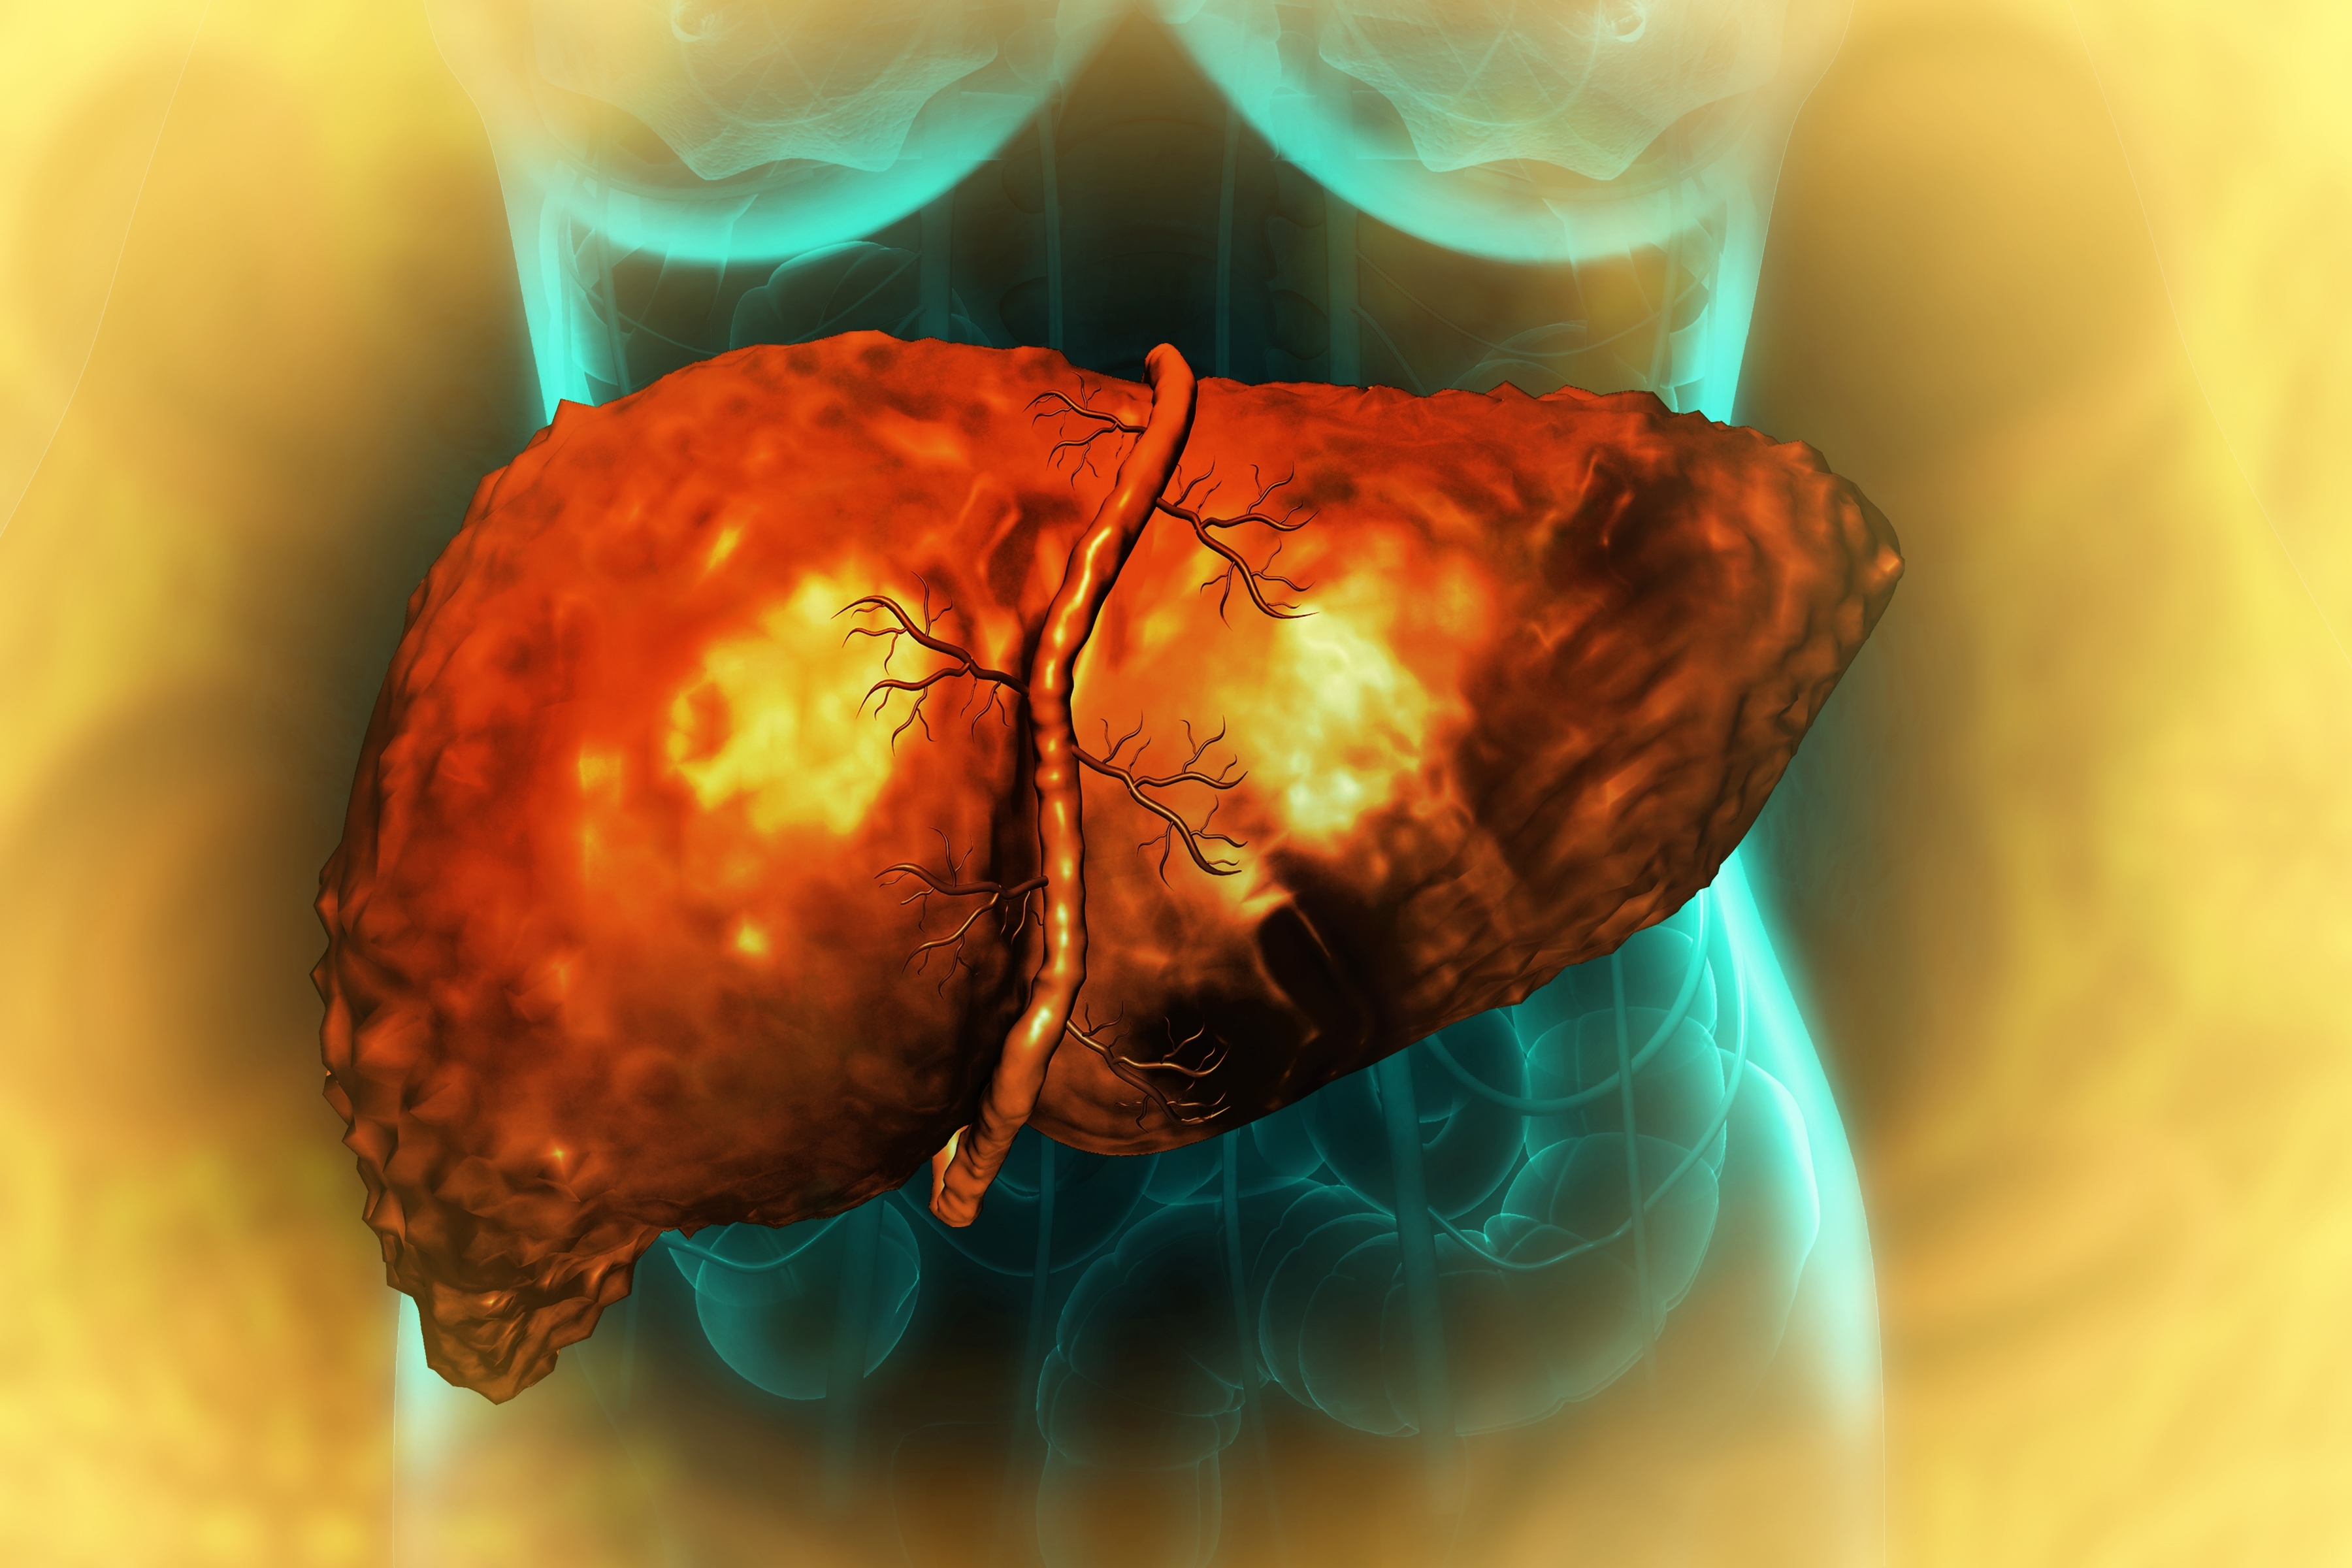 Major Cause of a Silent, Deadly Liver Disease